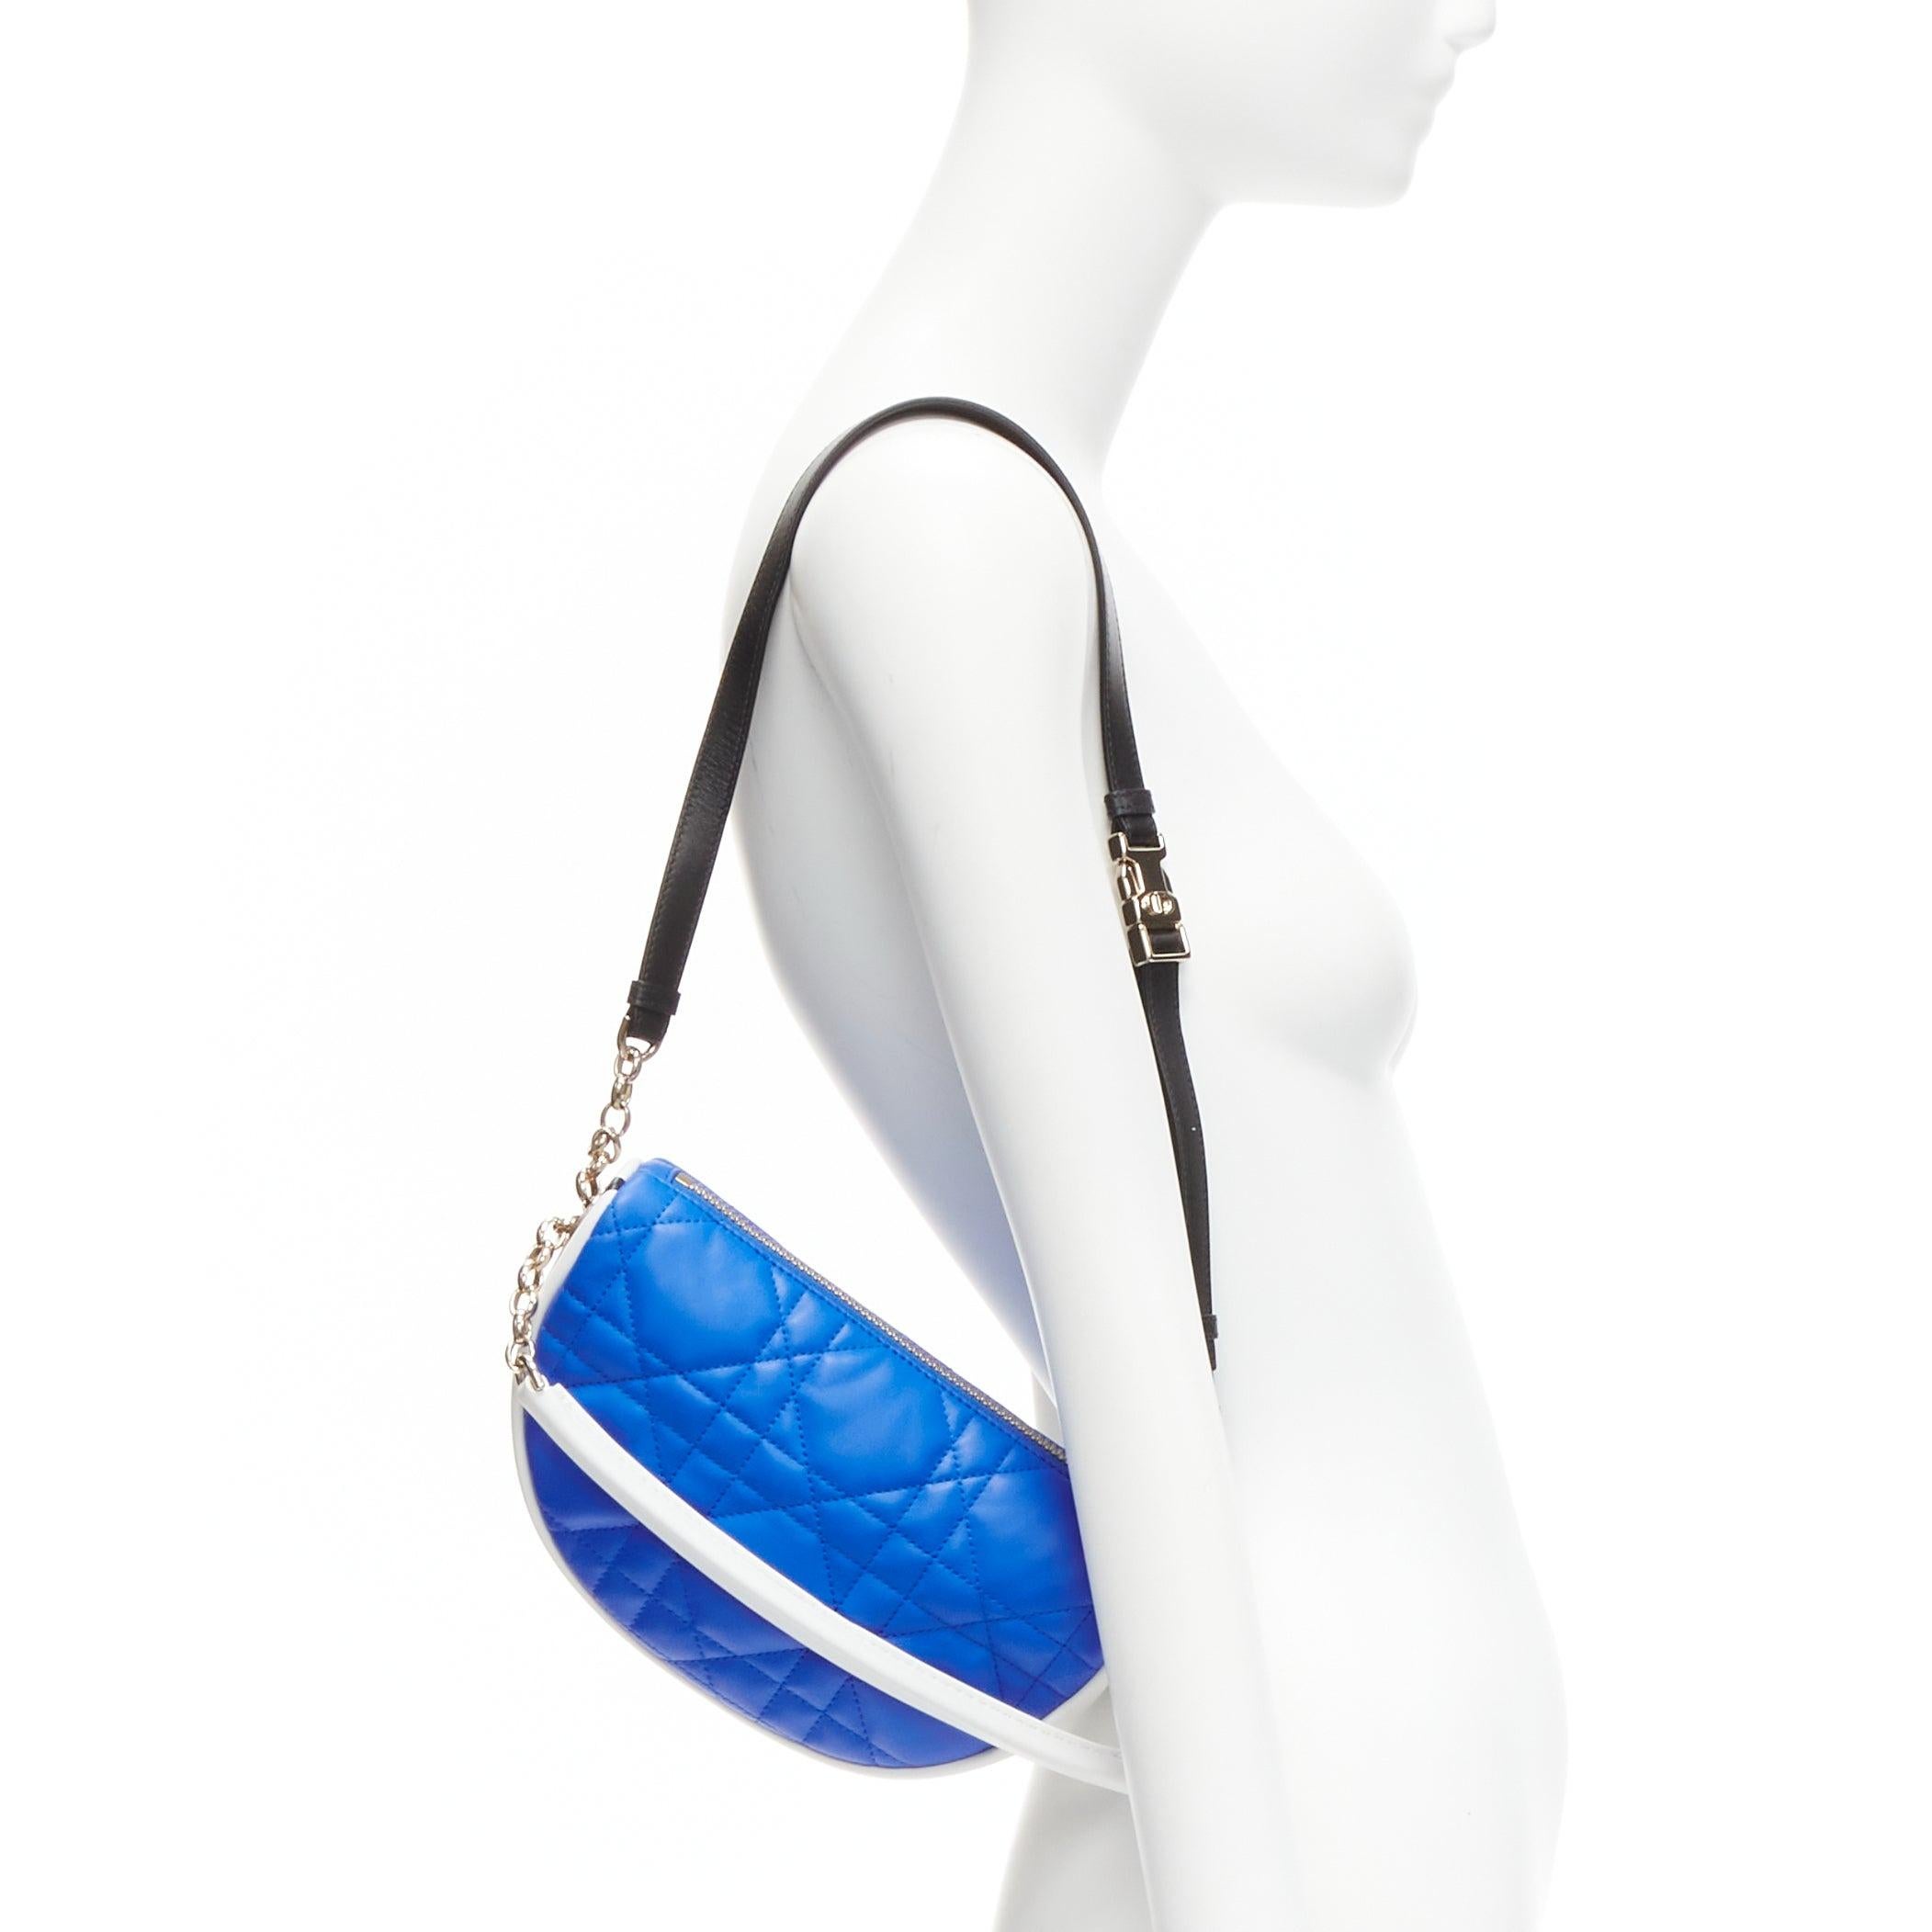 CHRISTIAN DIOR 2022 Vibe blue white cannage lambskin hobo shoulder bag
Reference: JYLM/A00049
Brand: Christian Dior
Designer: Maria Grazia Chiuri
Collection: 2022 Dior Vibe - Runway
Material: Leather
Color: Blue, White
Pattern: Solid
Closure: